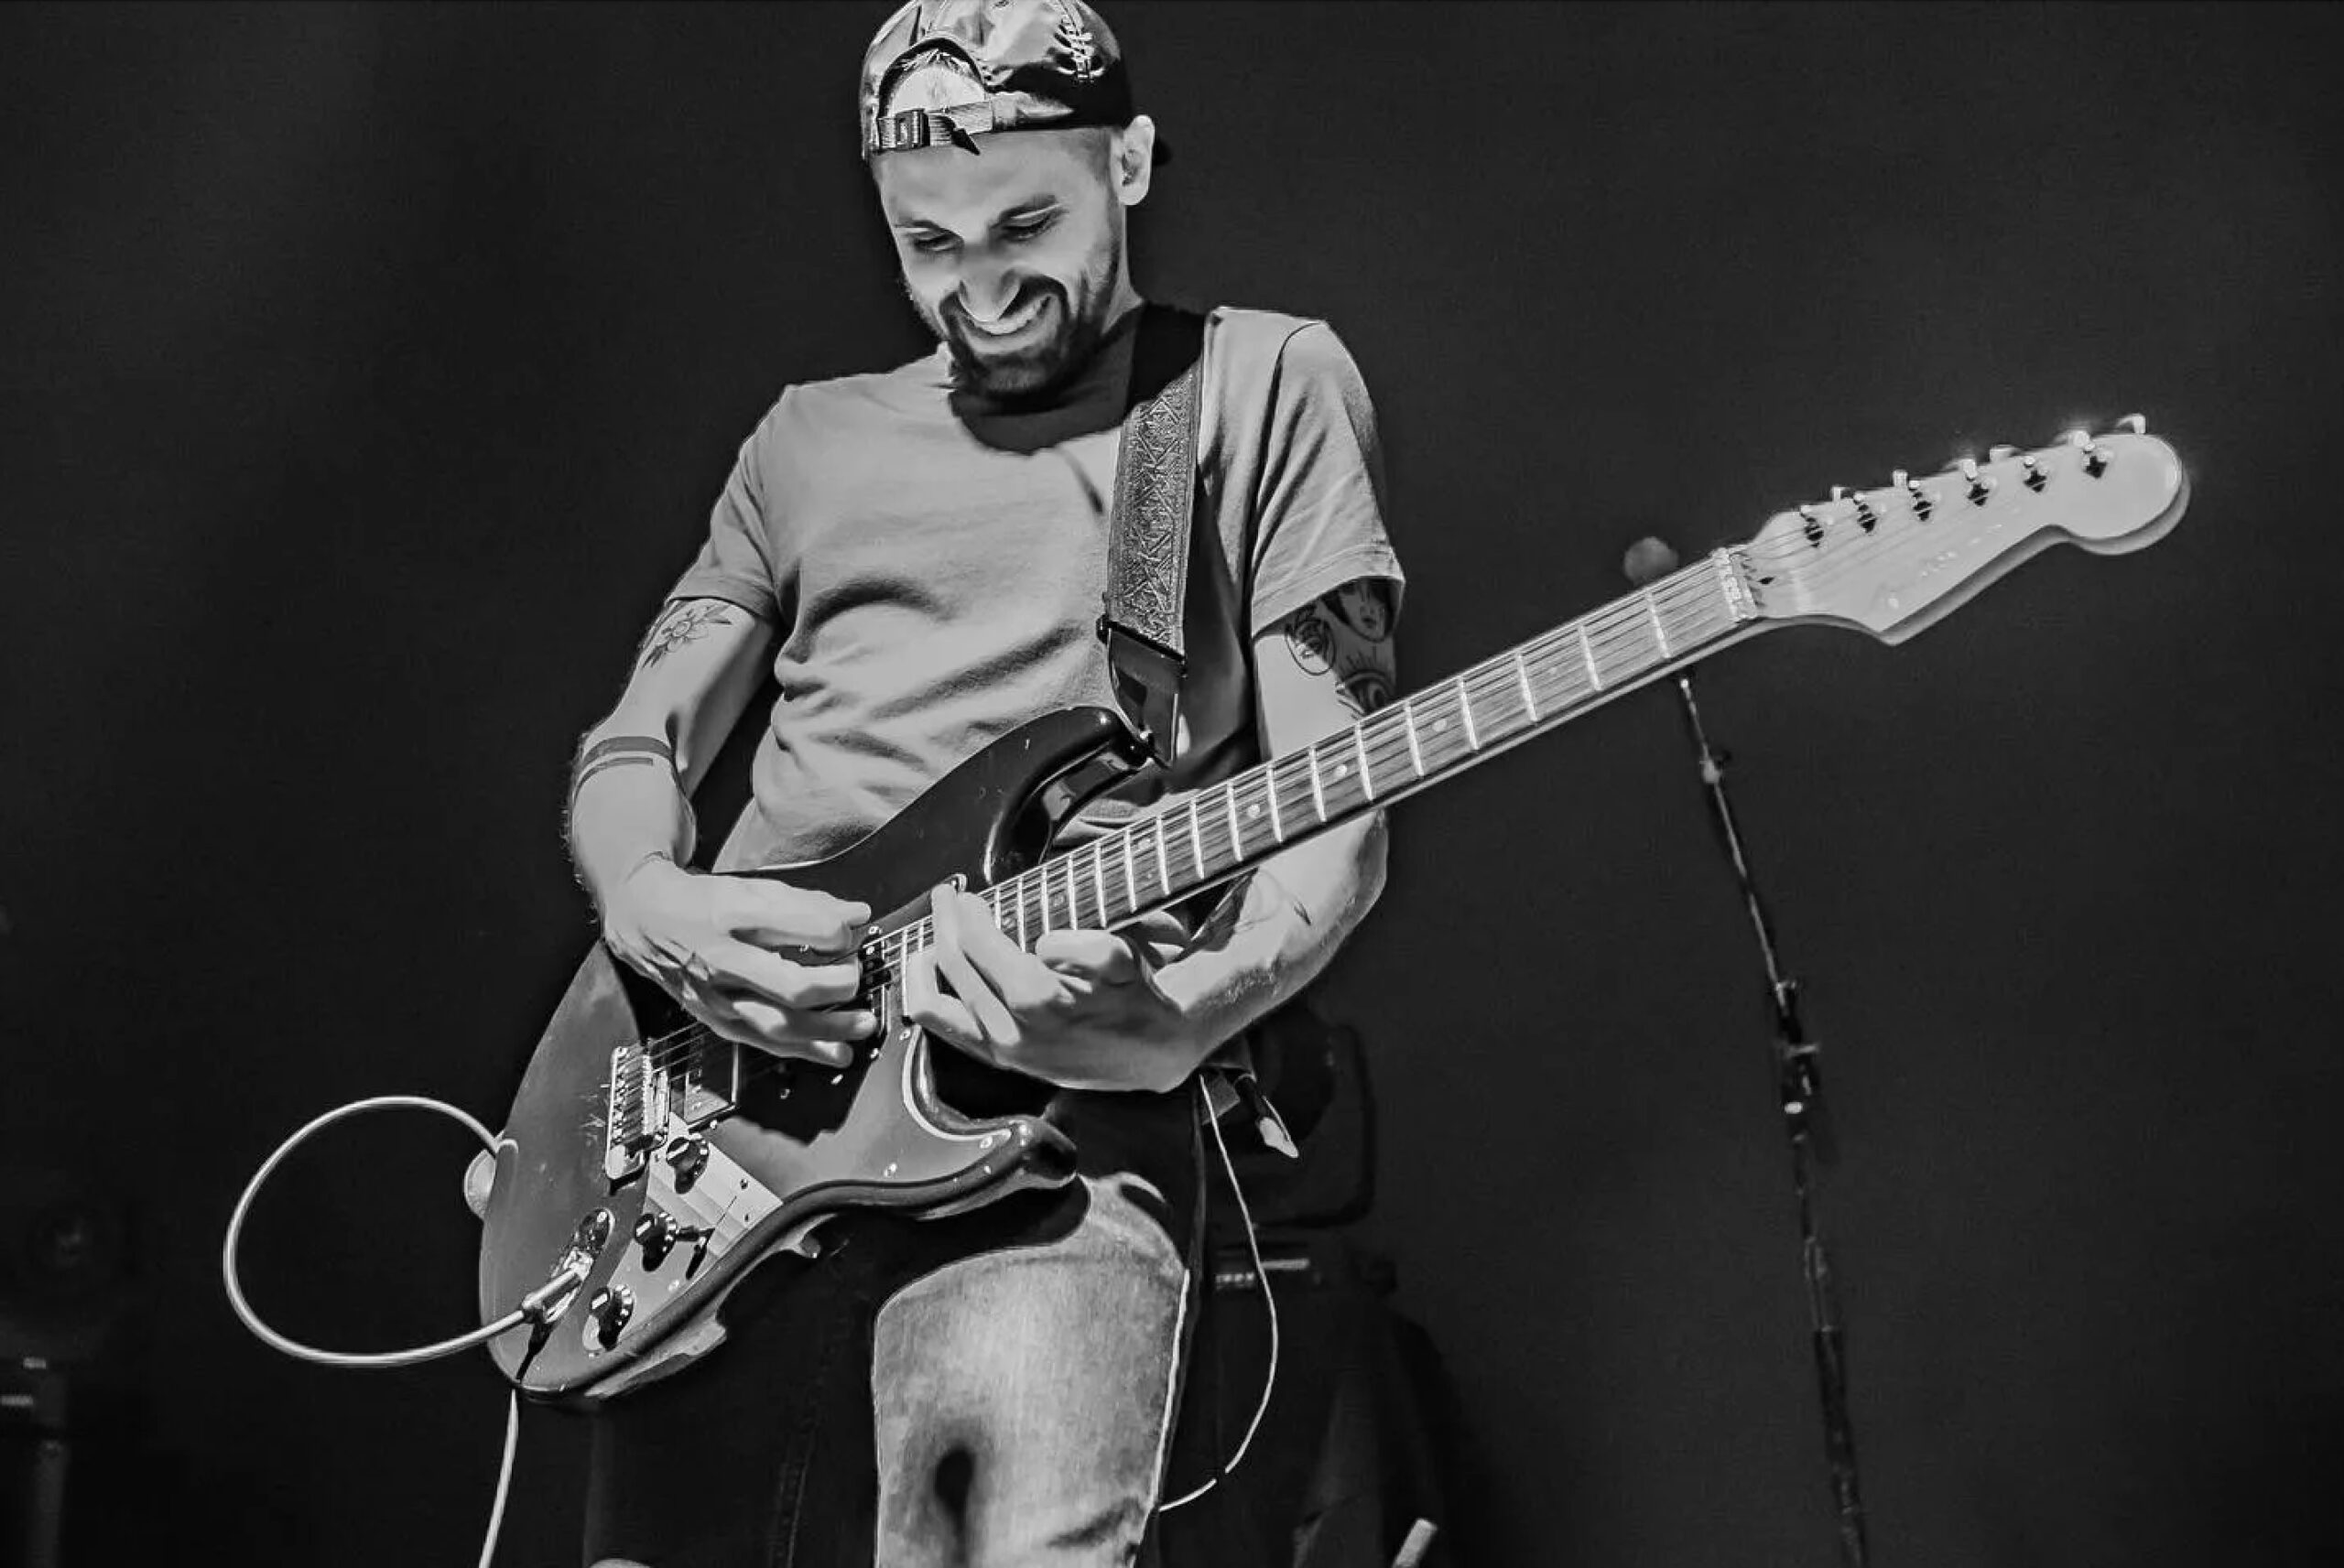 Why Music Matters with Jeff Miers – ep 6: A conversation with Mike Gantzer of Aqueous